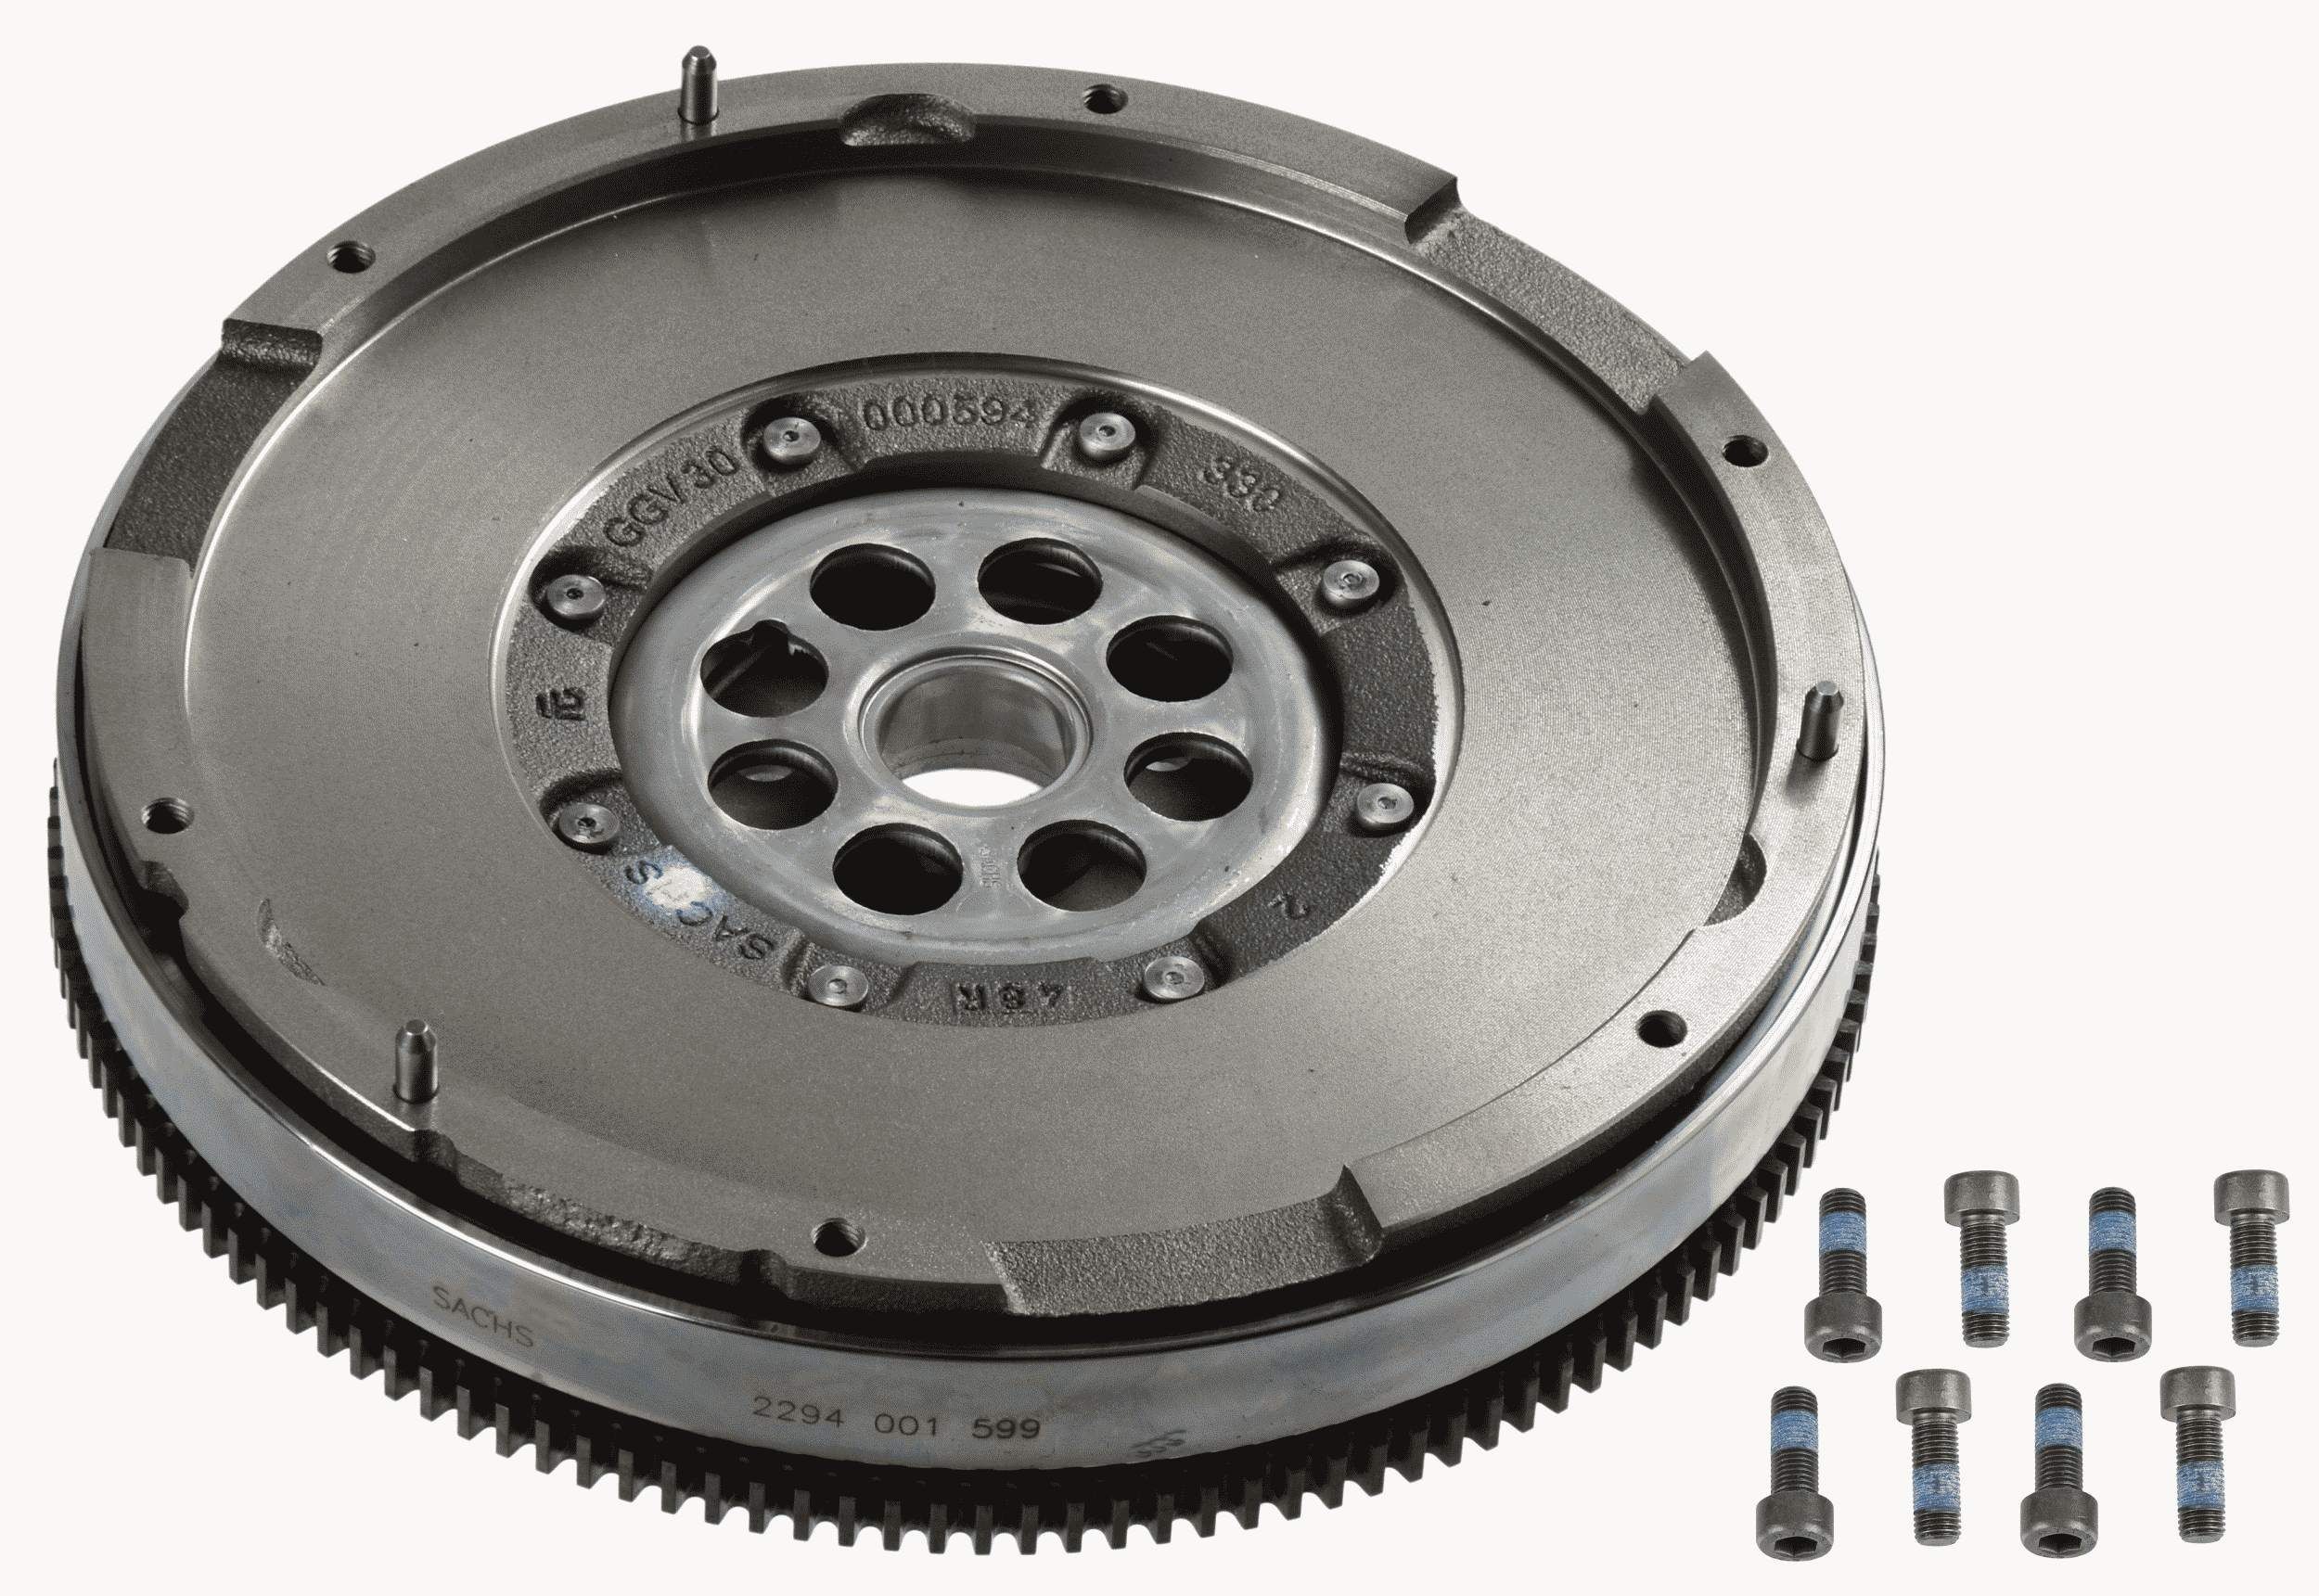 Great value for money - SACHS Dual mass flywheel 2294 001 599